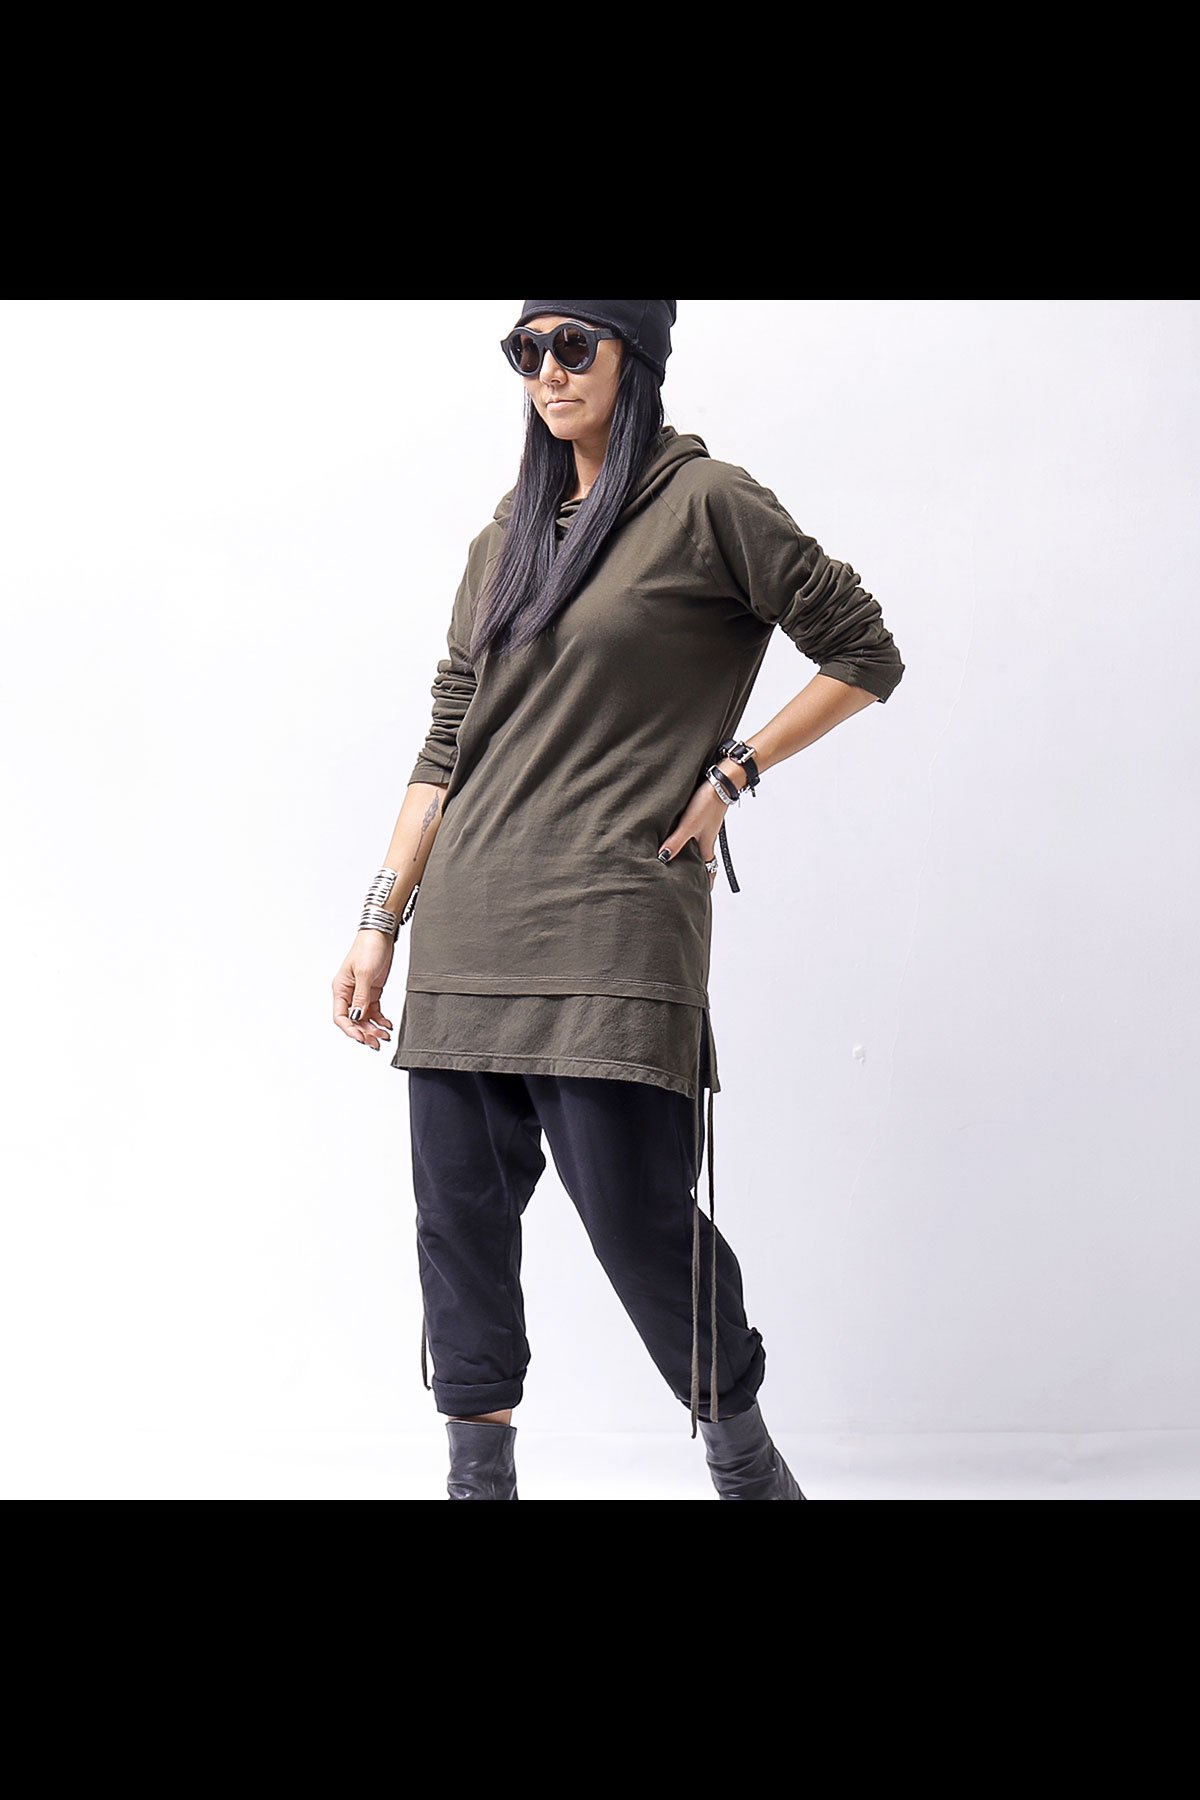 <img class='new_mark_img1' src='https://img.shop-pro.jp/img/new/icons8.gif' style='border:none;display:inline;margin:0px;padding:0px;width:auto;' />UNISEX COTTON HOODIE TOP OPF61_OLIVE MILITARY